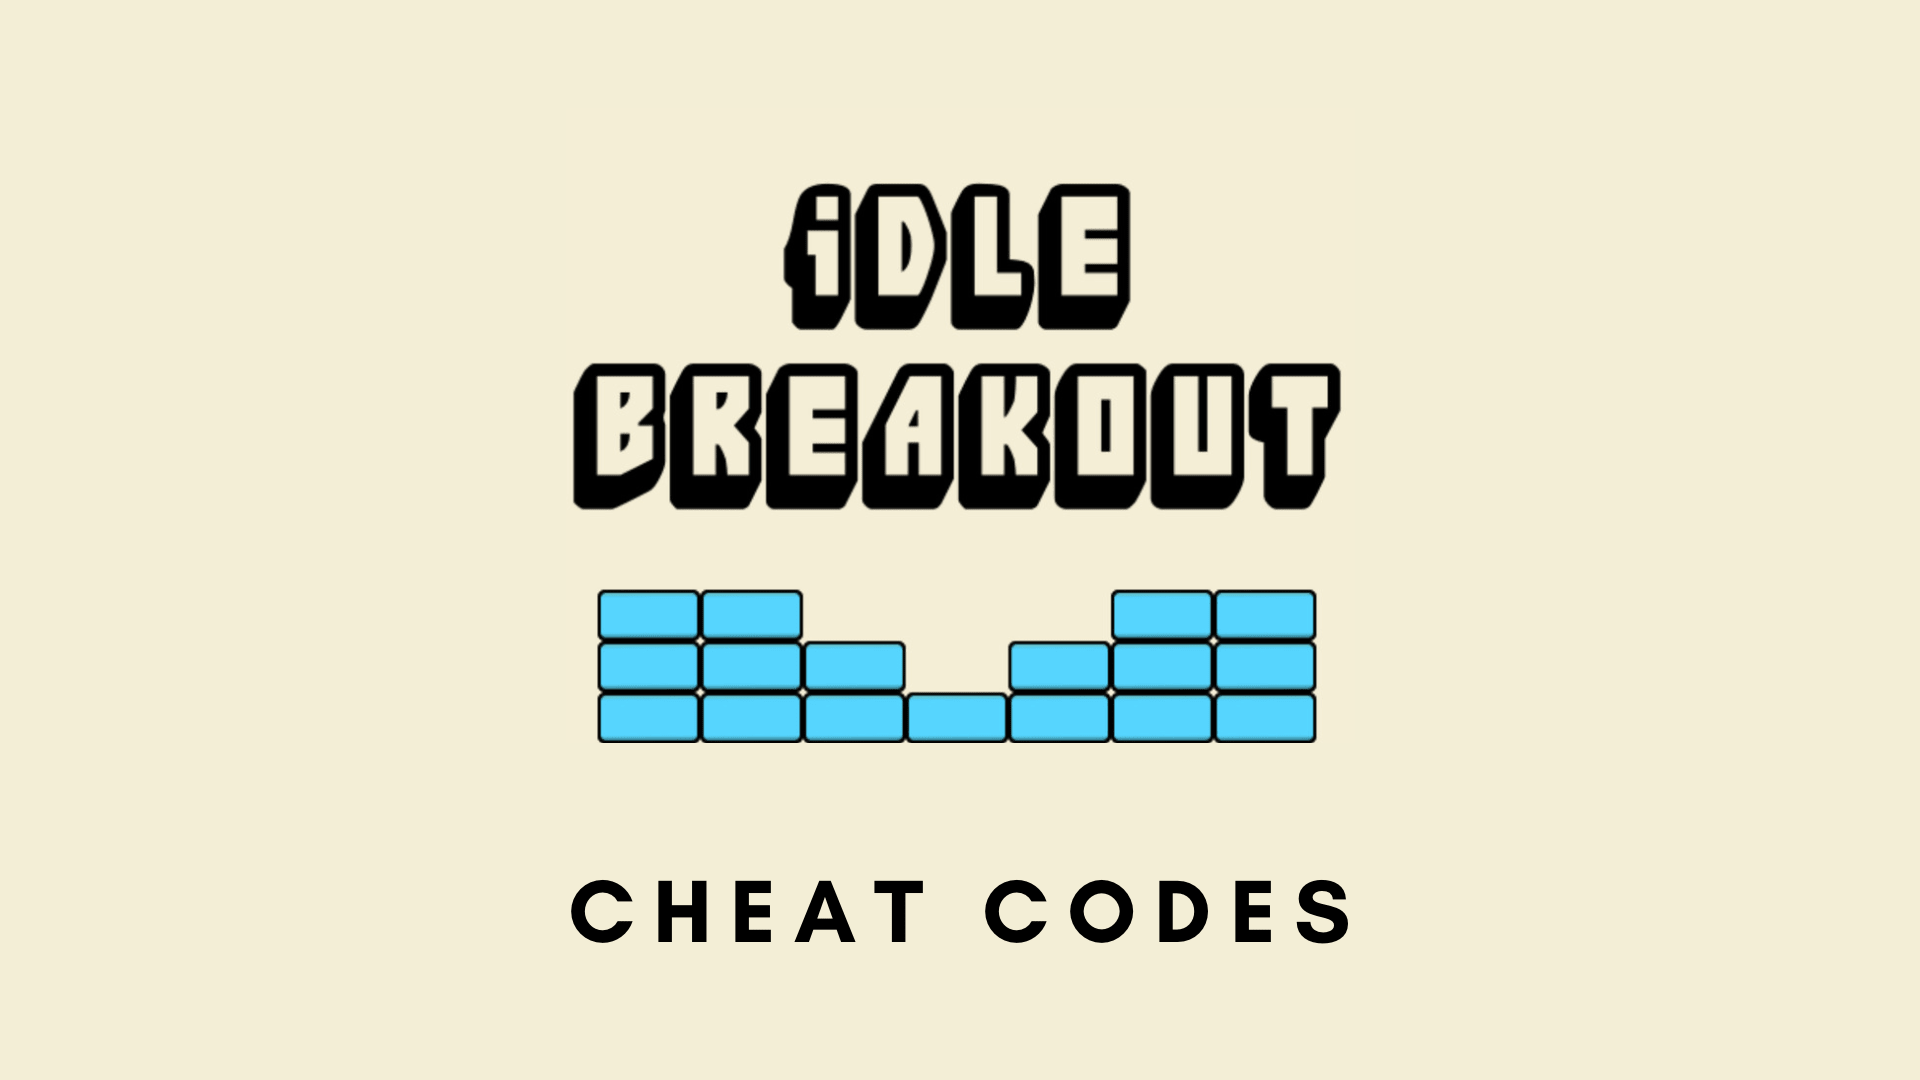 GitHub - Cracko298/Idle-Breakout-Cheat: These are very simple